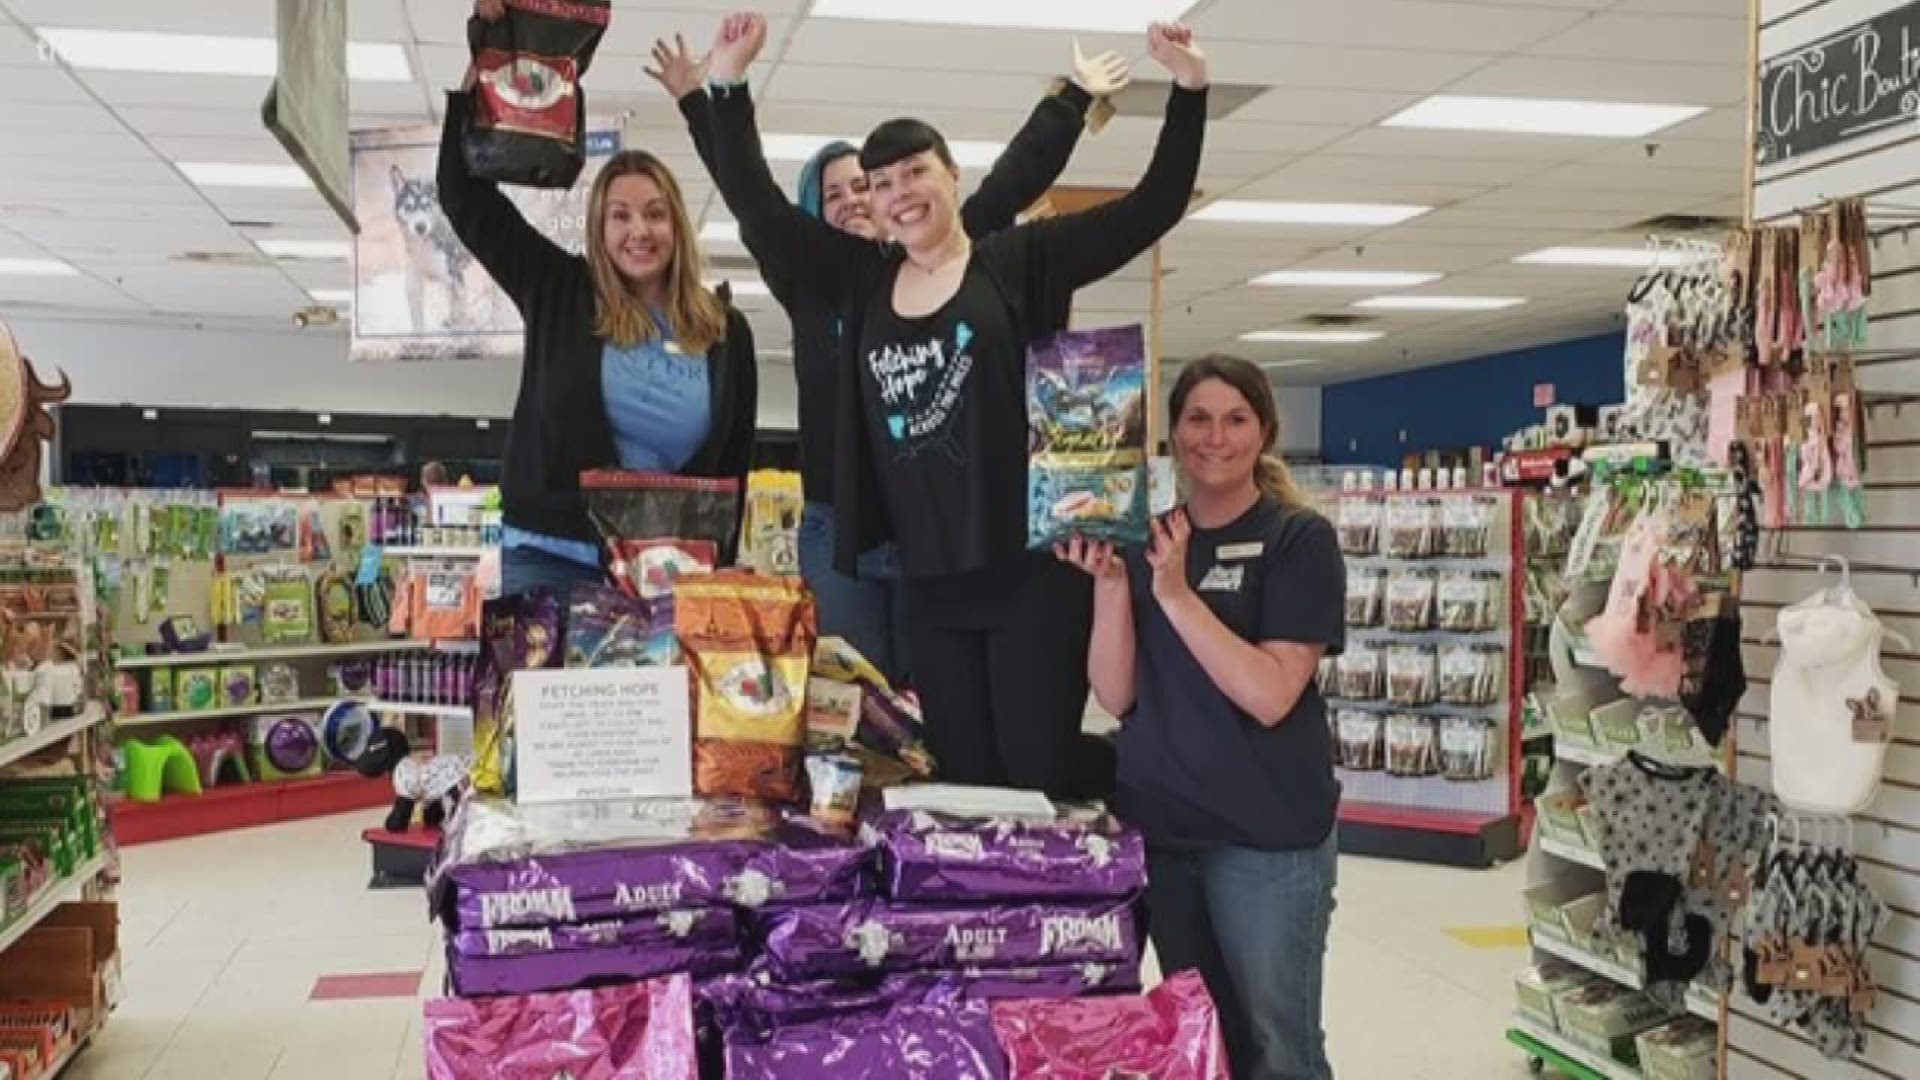 A Maine woman is driving 1,500 miles to Arkansas with over 3,500 pounds of food for dogs in need.